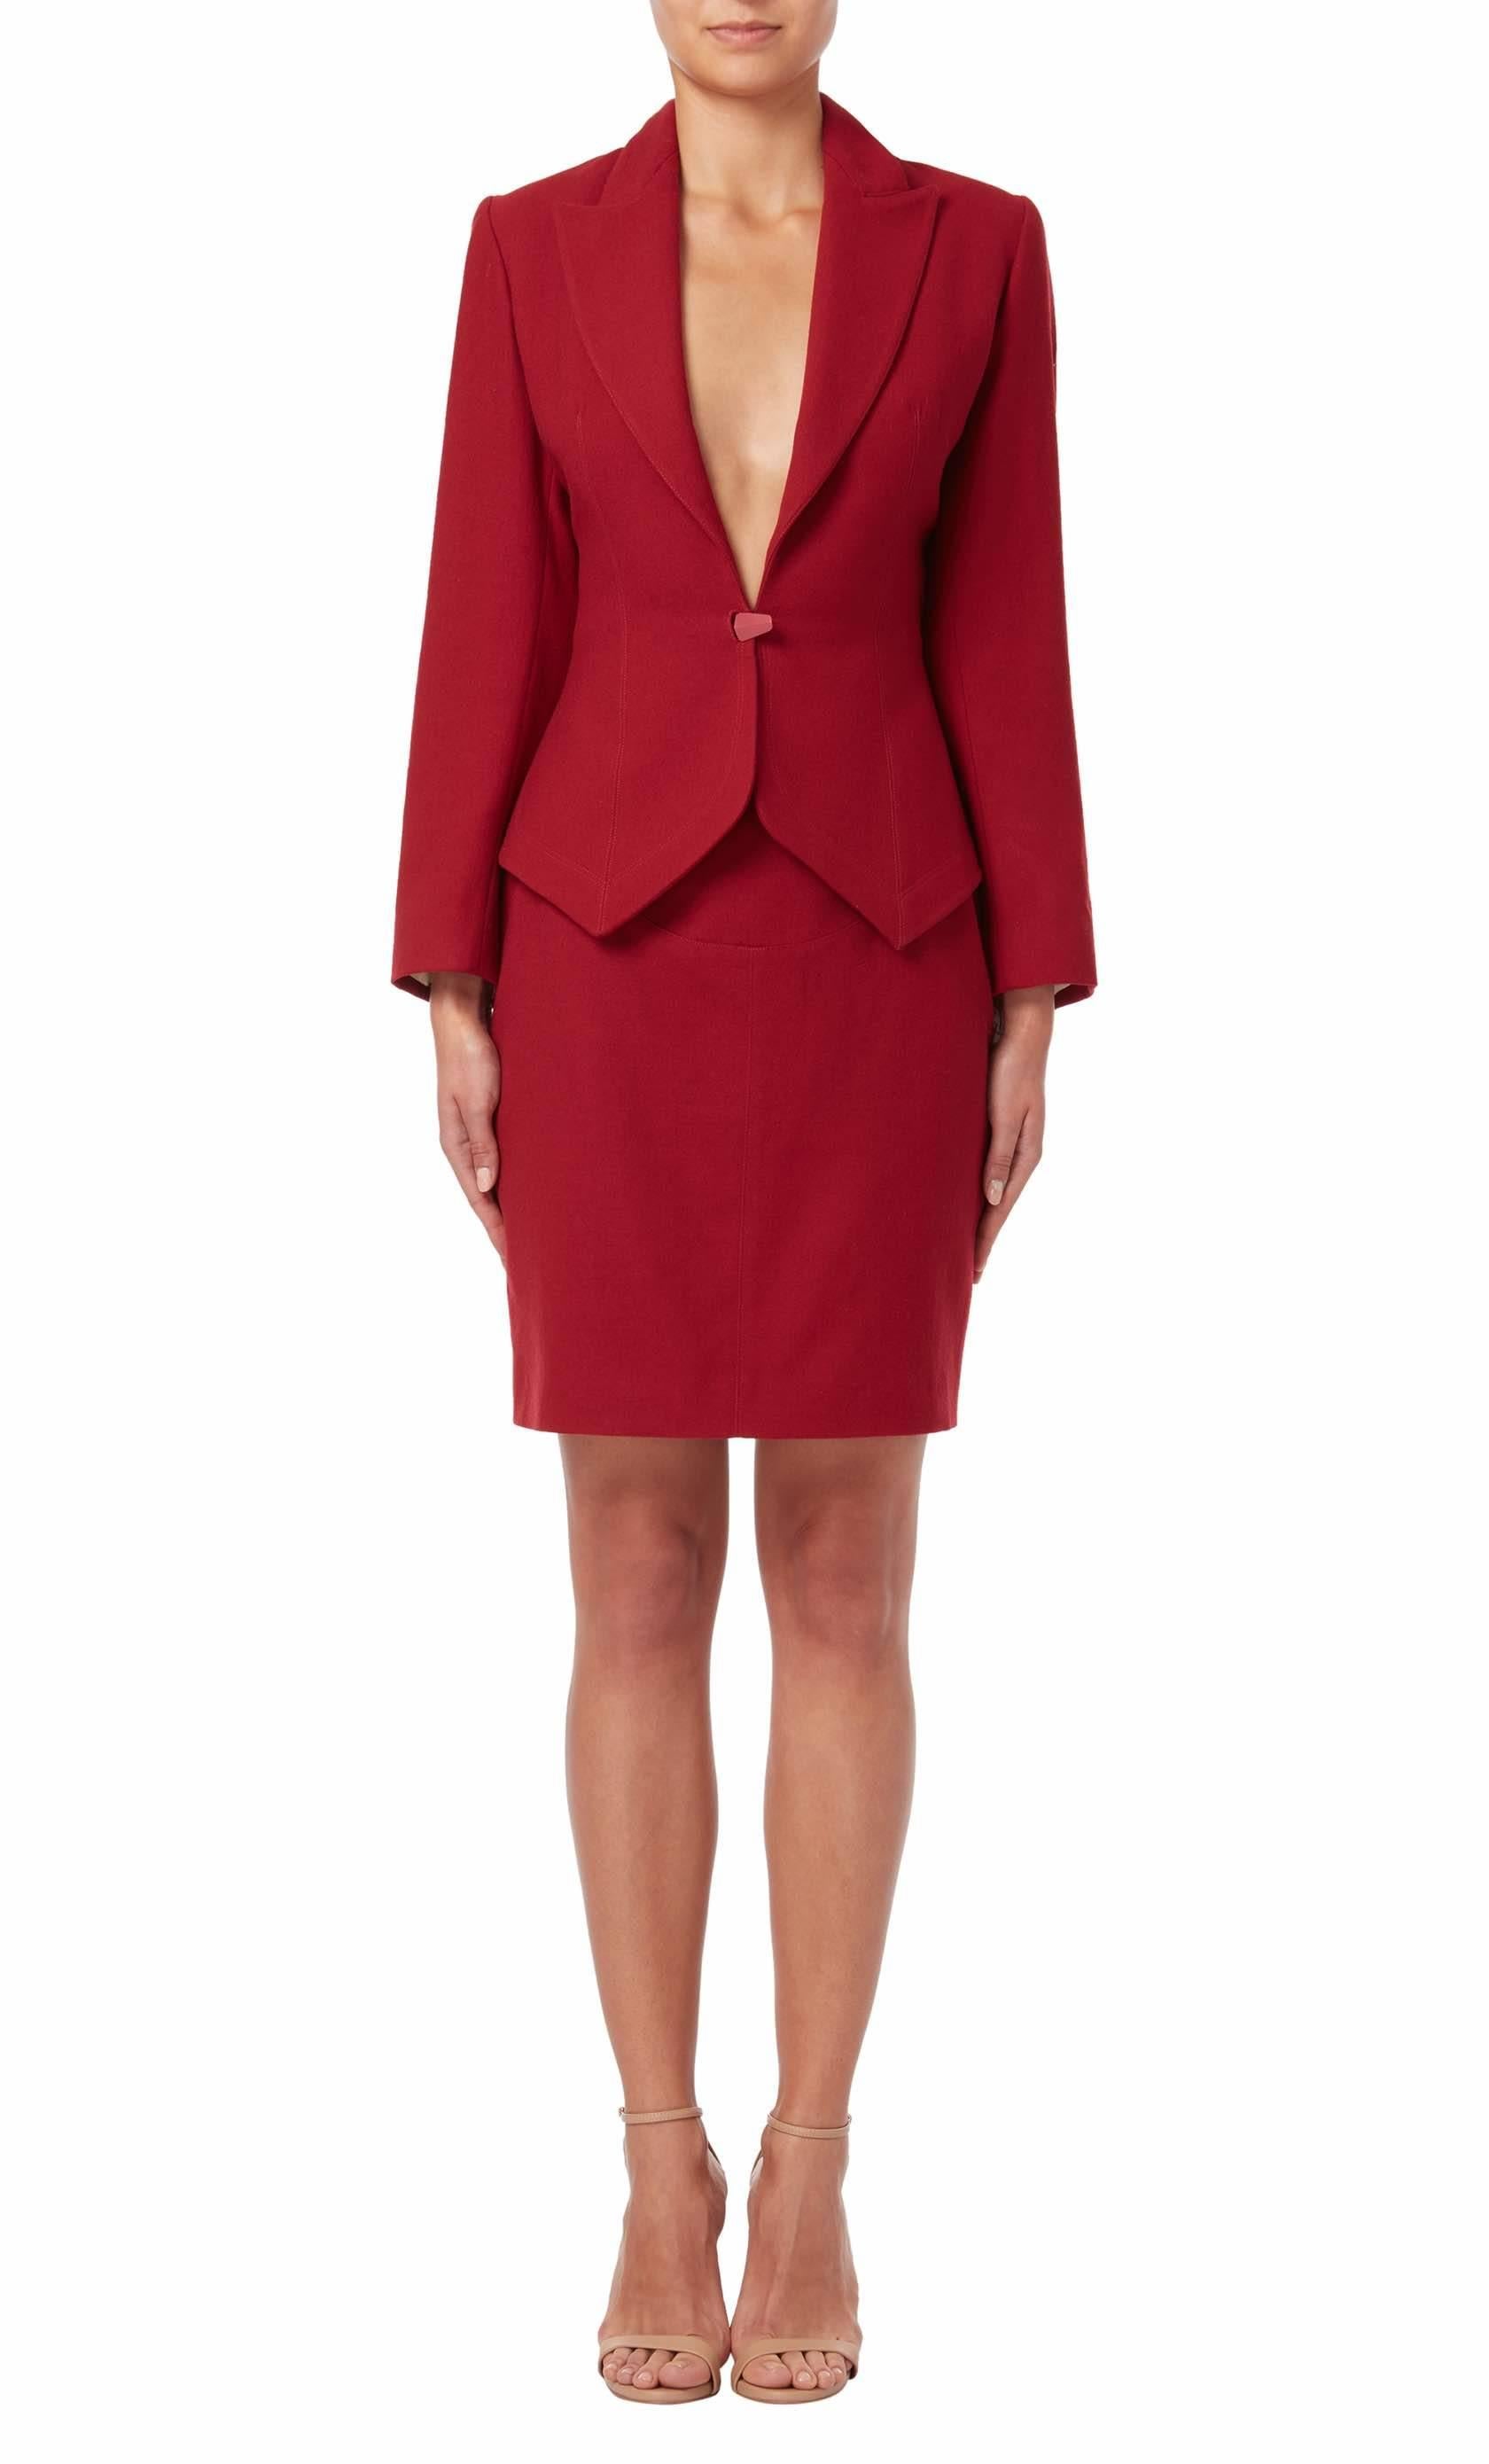 Red skirt suit by Azzedine Alaia from the Spring/Summer 1992 collection. The skirt suit features a form fitting silhouette and has a butterfly printed silk lining to the jacket.
 